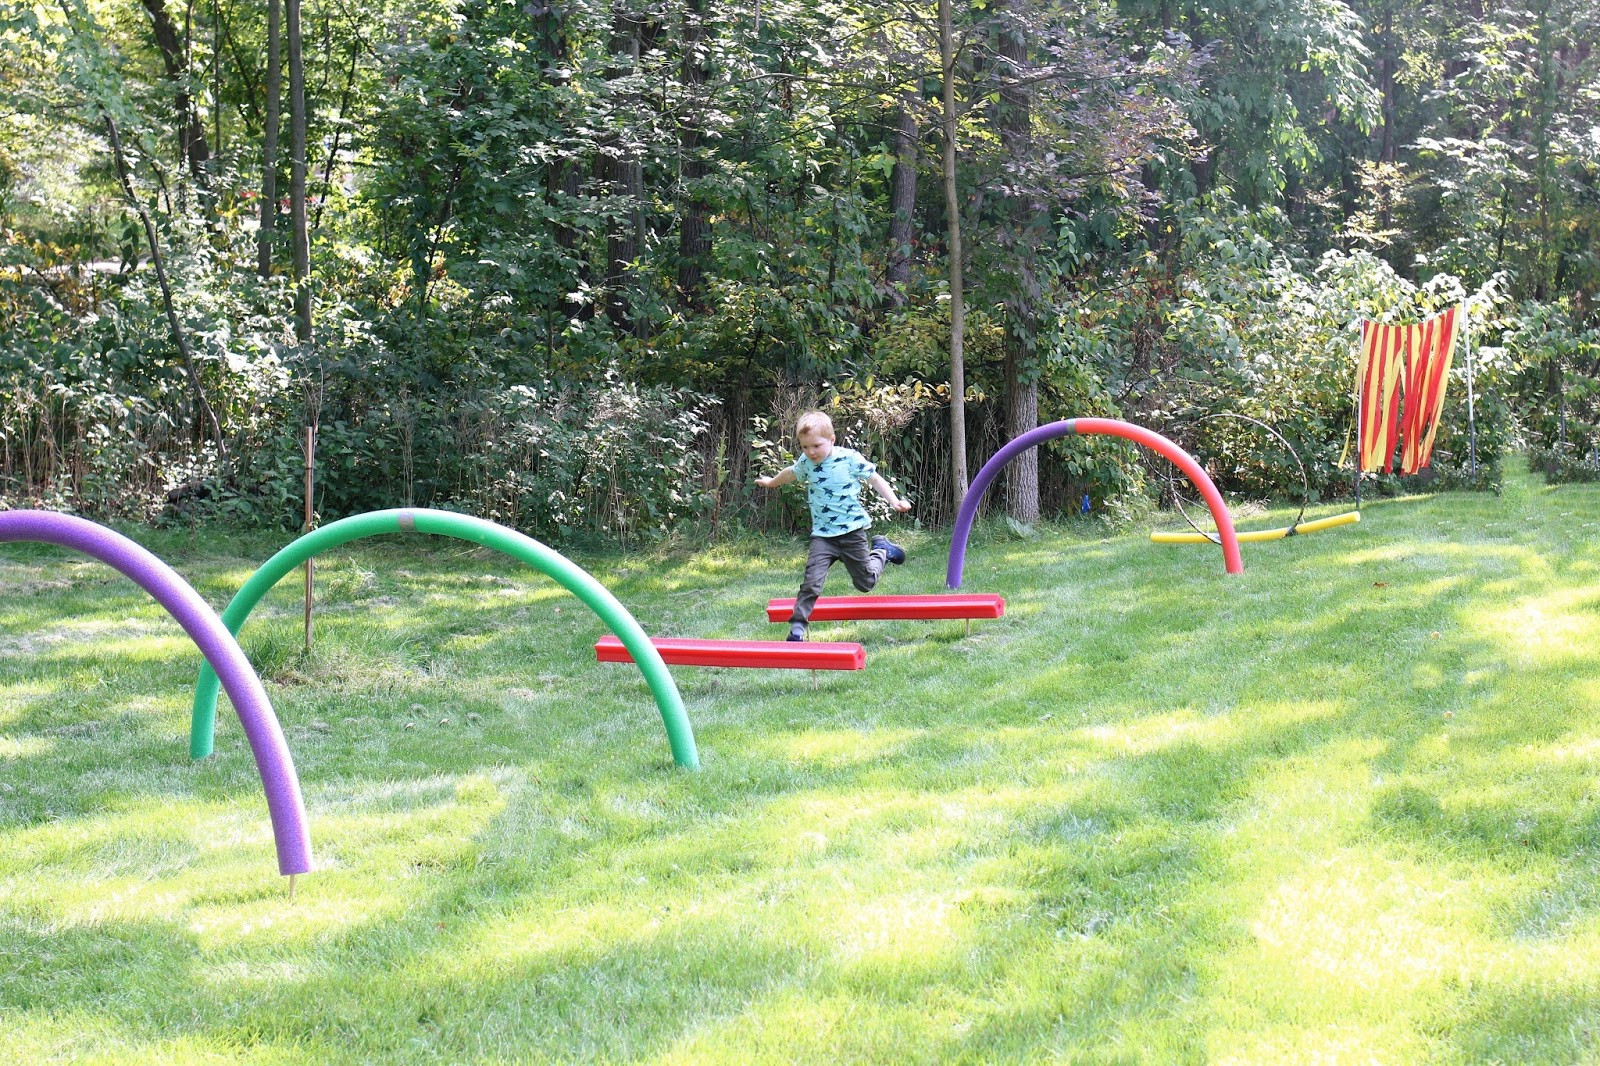 DIY Obstacle Course For Kids
 DIY Obstacle Course for Kids